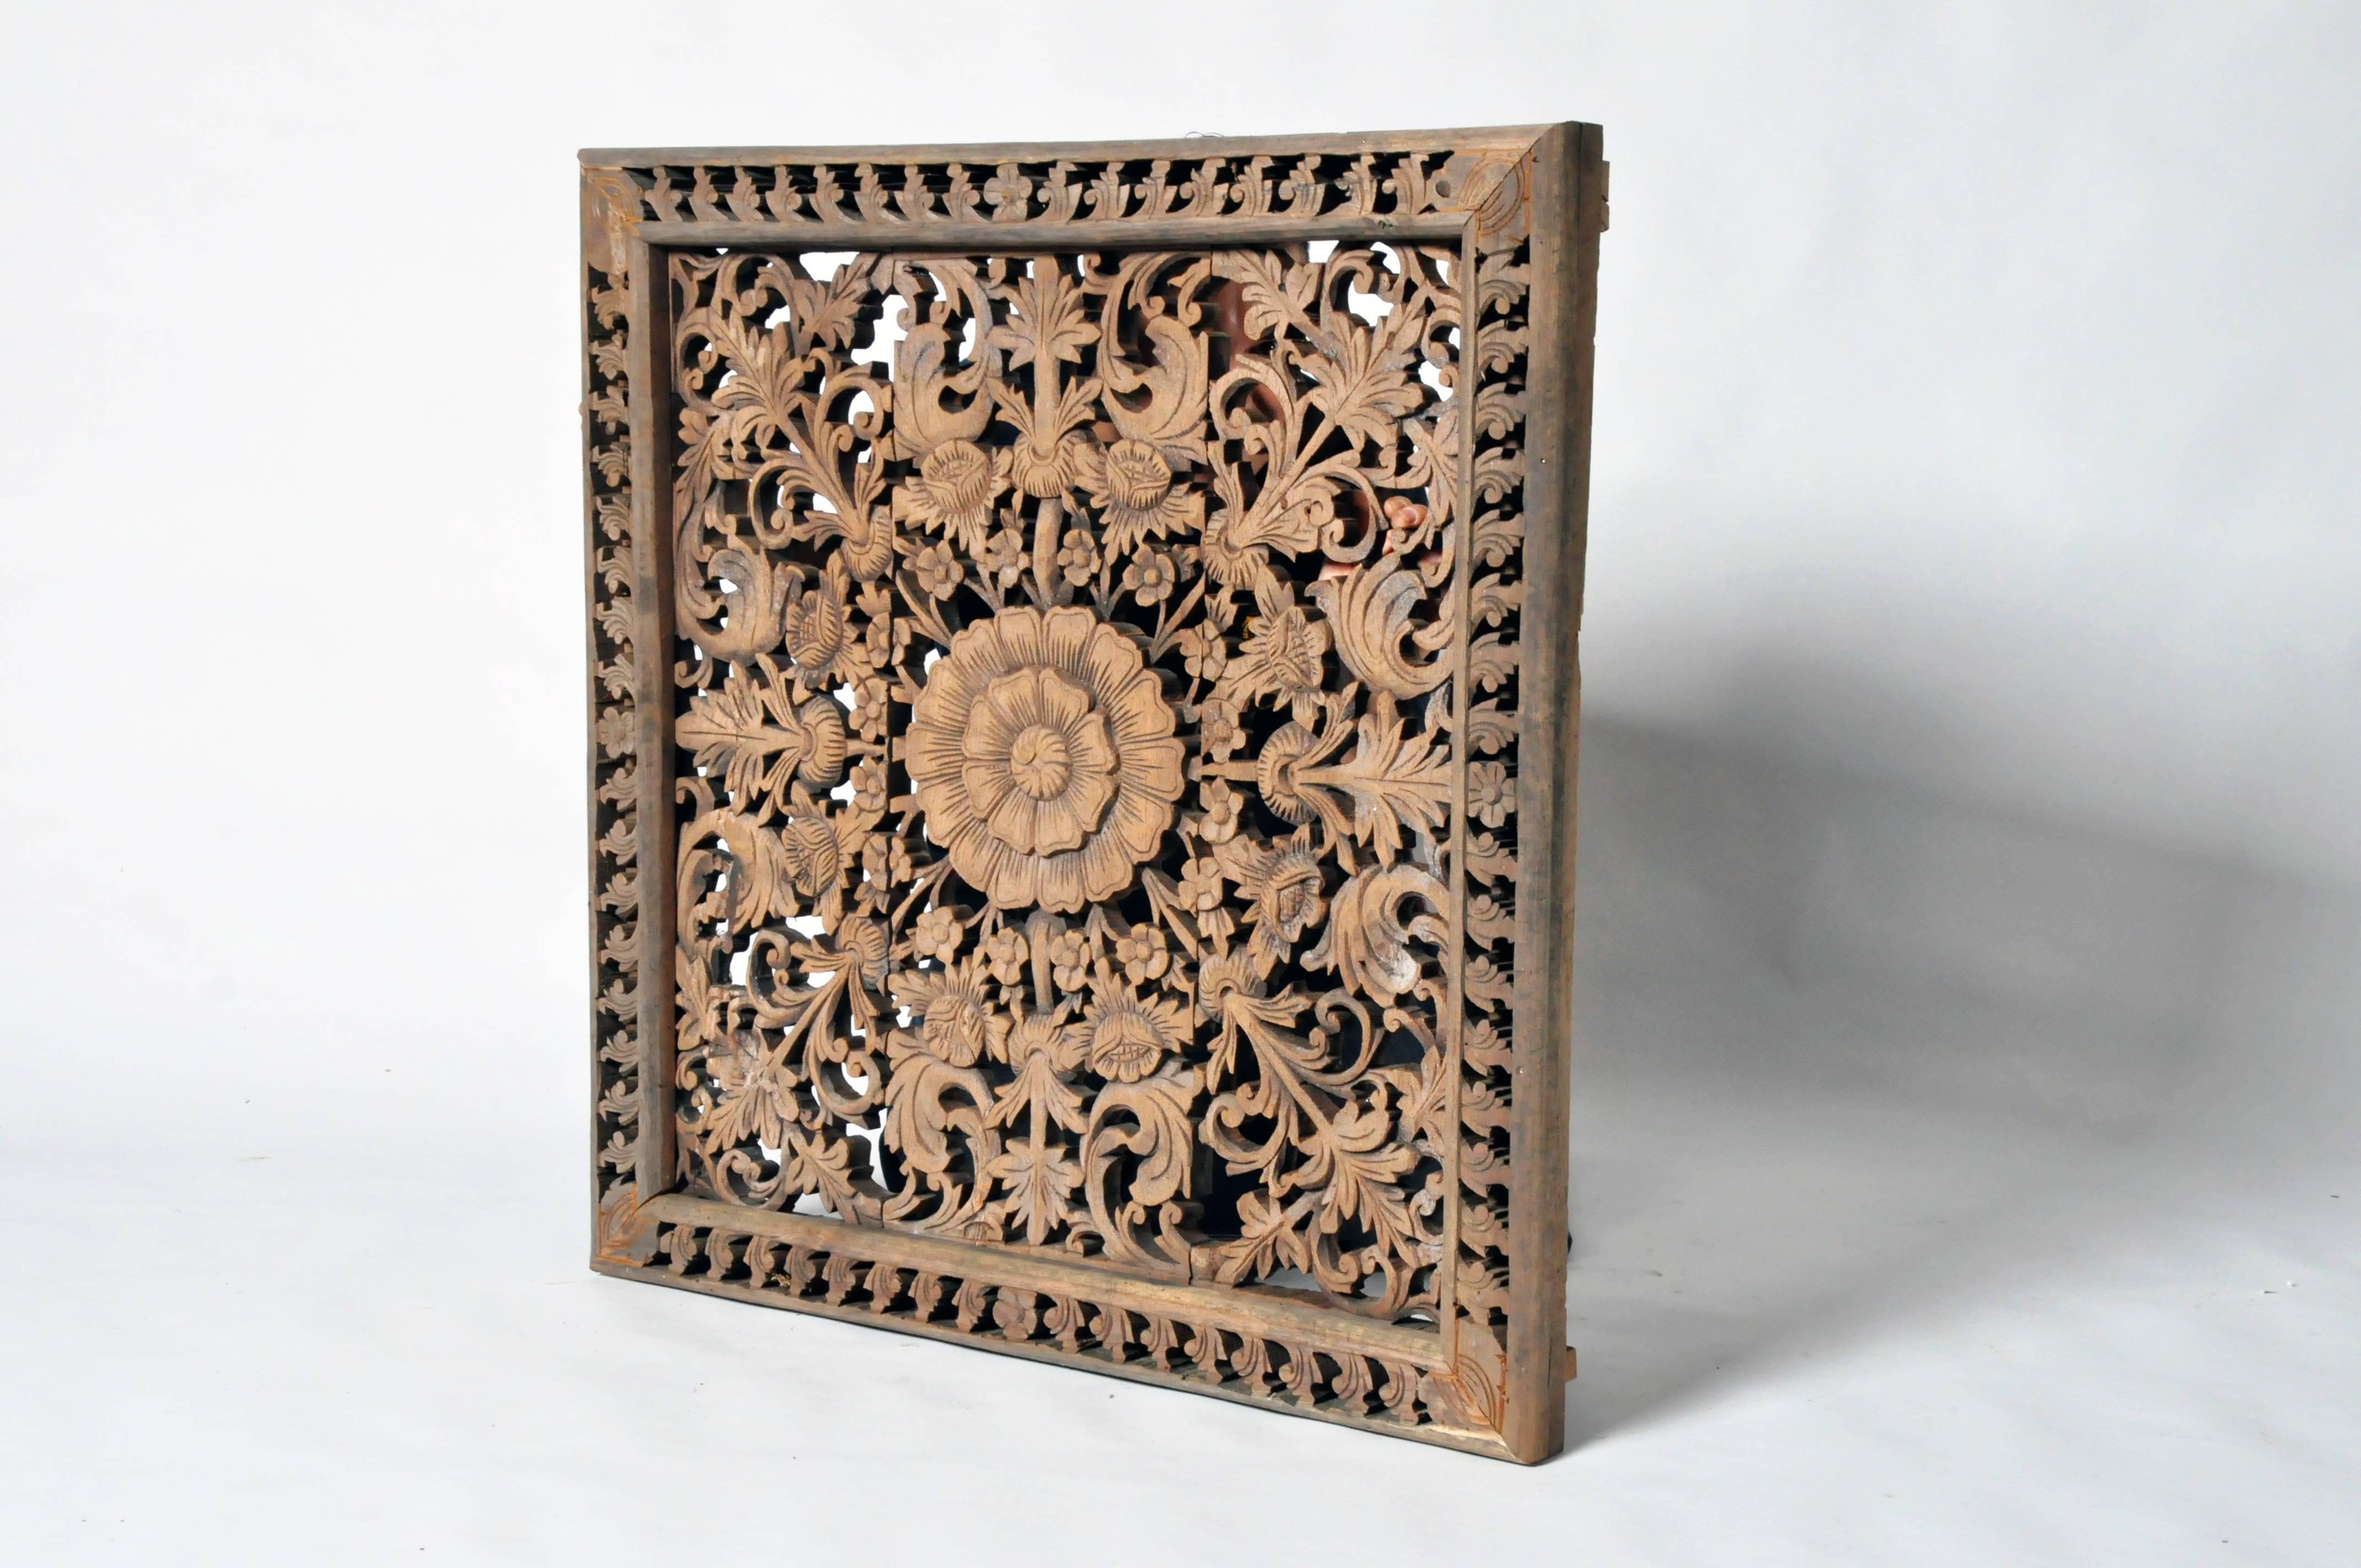 This intricately hand-carved, the panel depicts a central medallion of blossoms and C-scroll leaf decorations that are framed by a repetitive stylized border. It is made from teakwood and is from the northern part of Thailand.